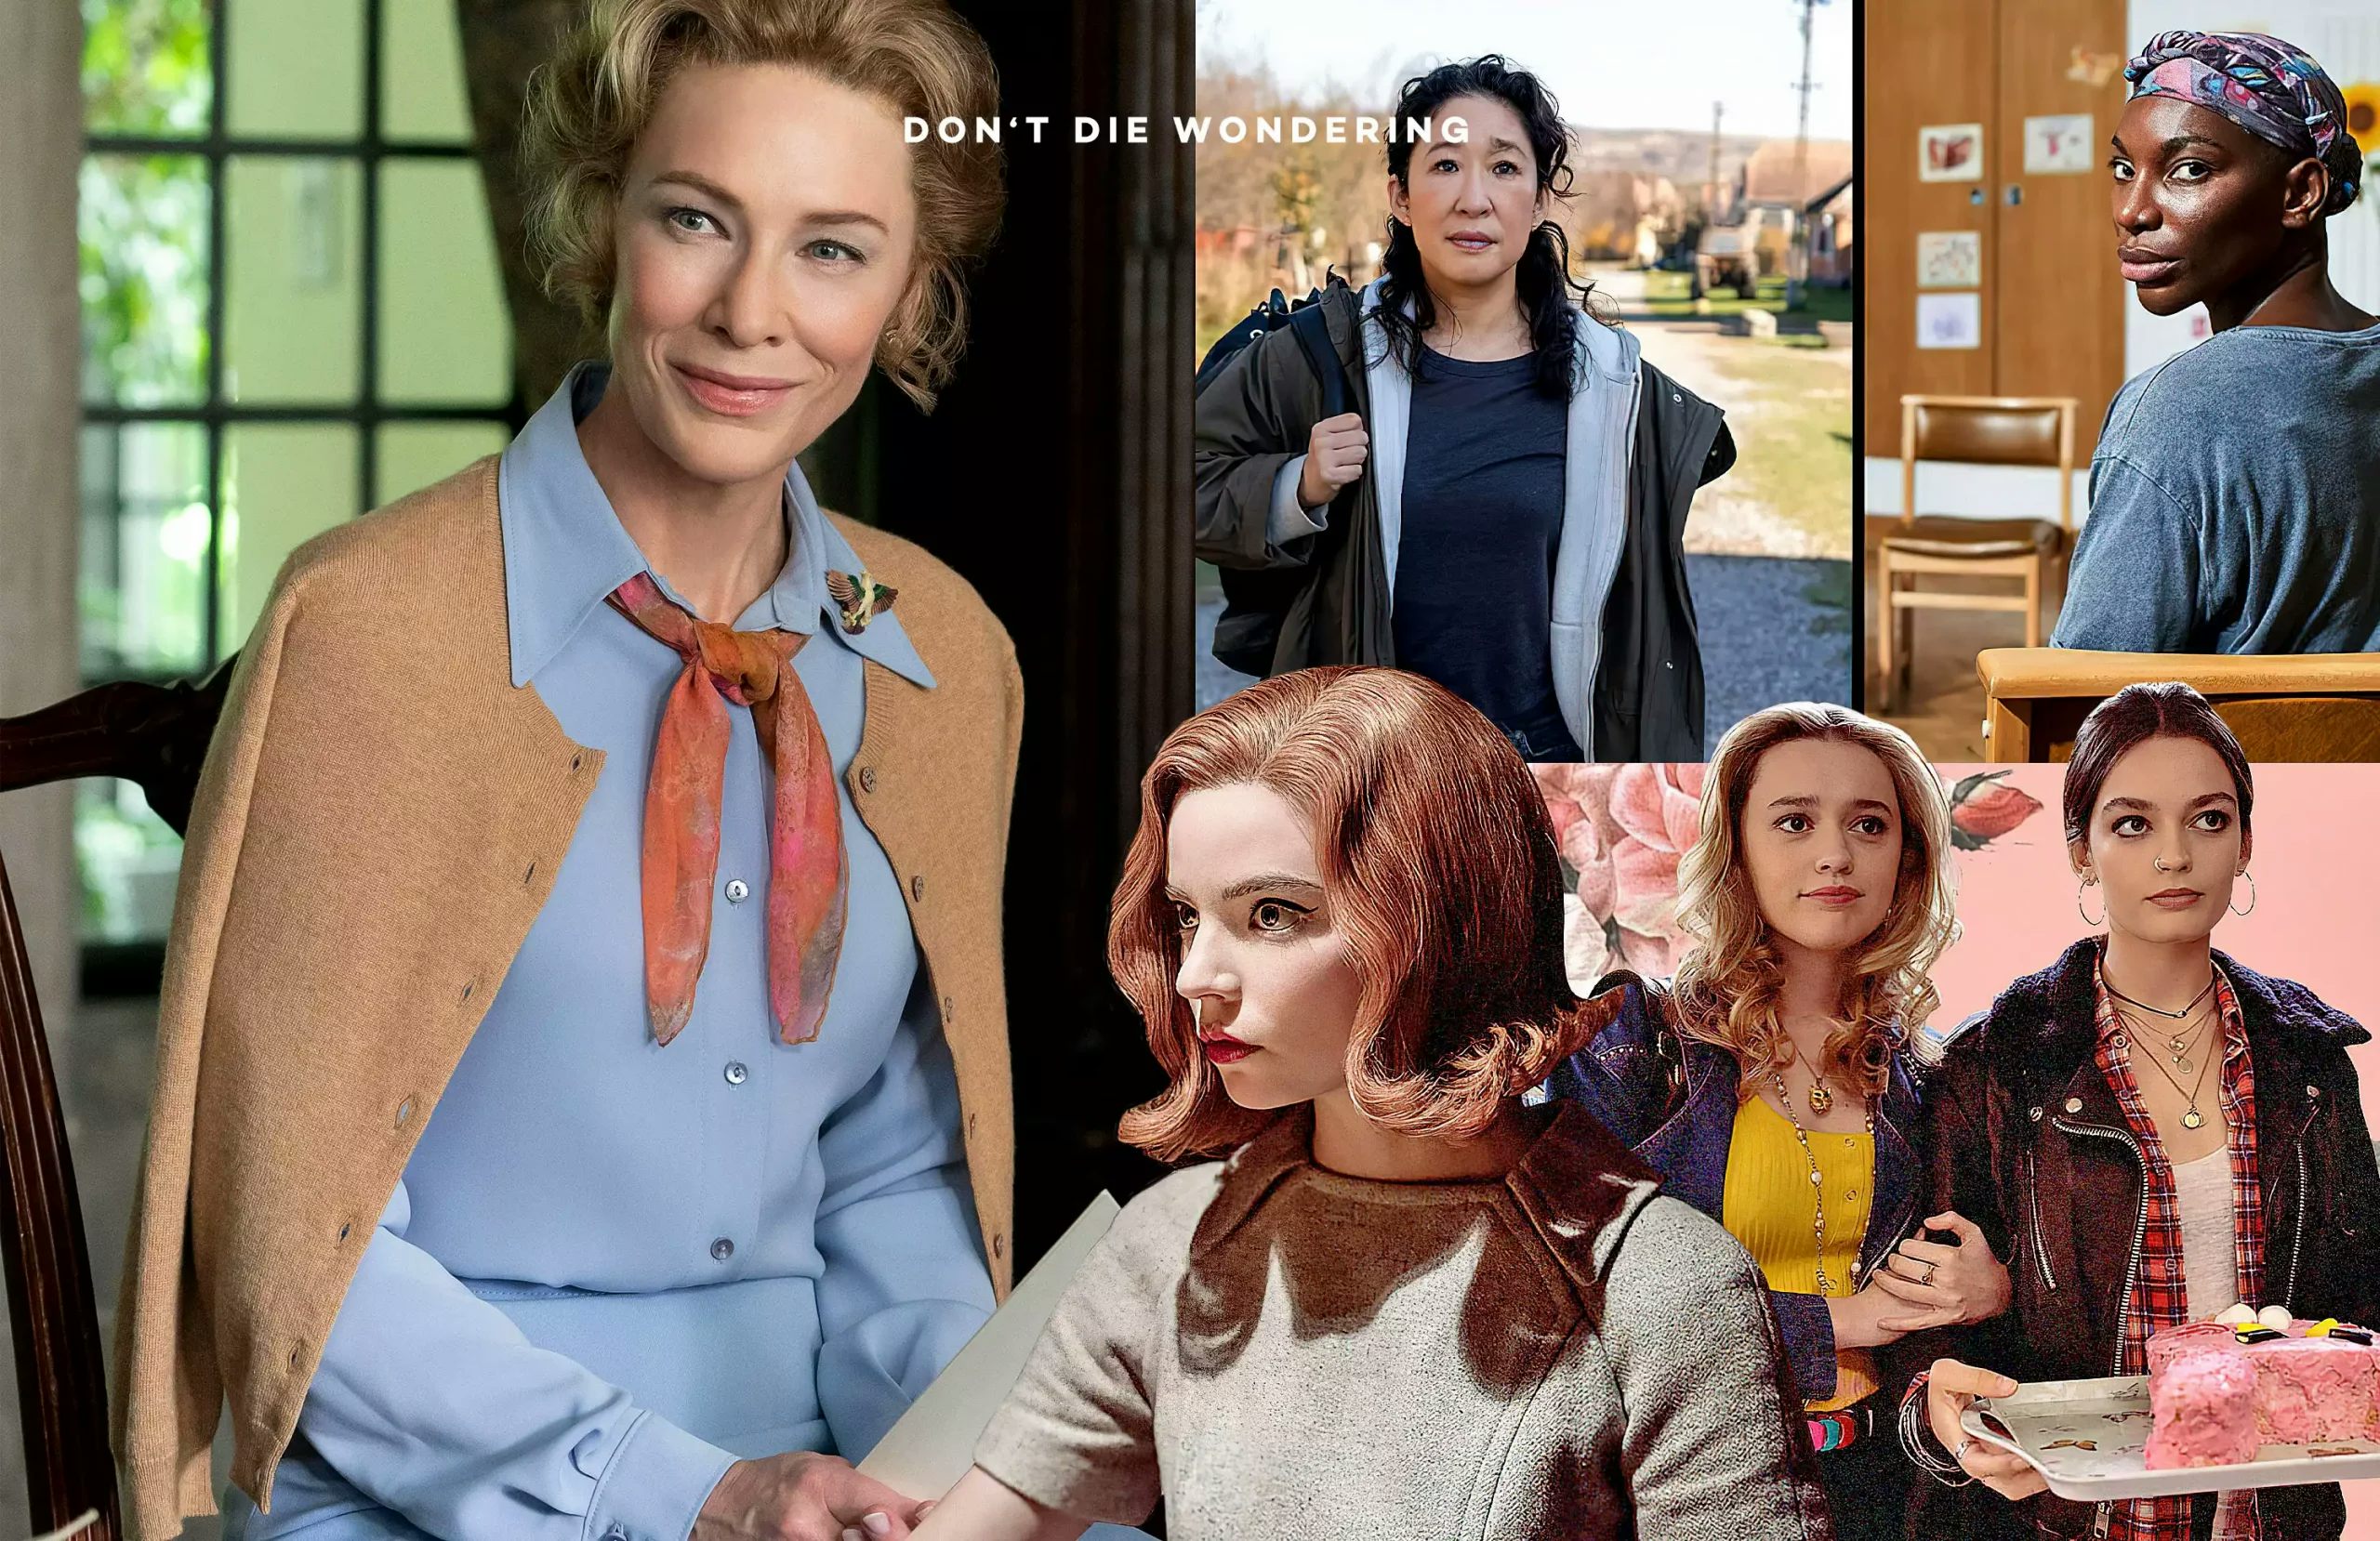 The Must-Watch Feminist TV Shows To Empower And Inspire You